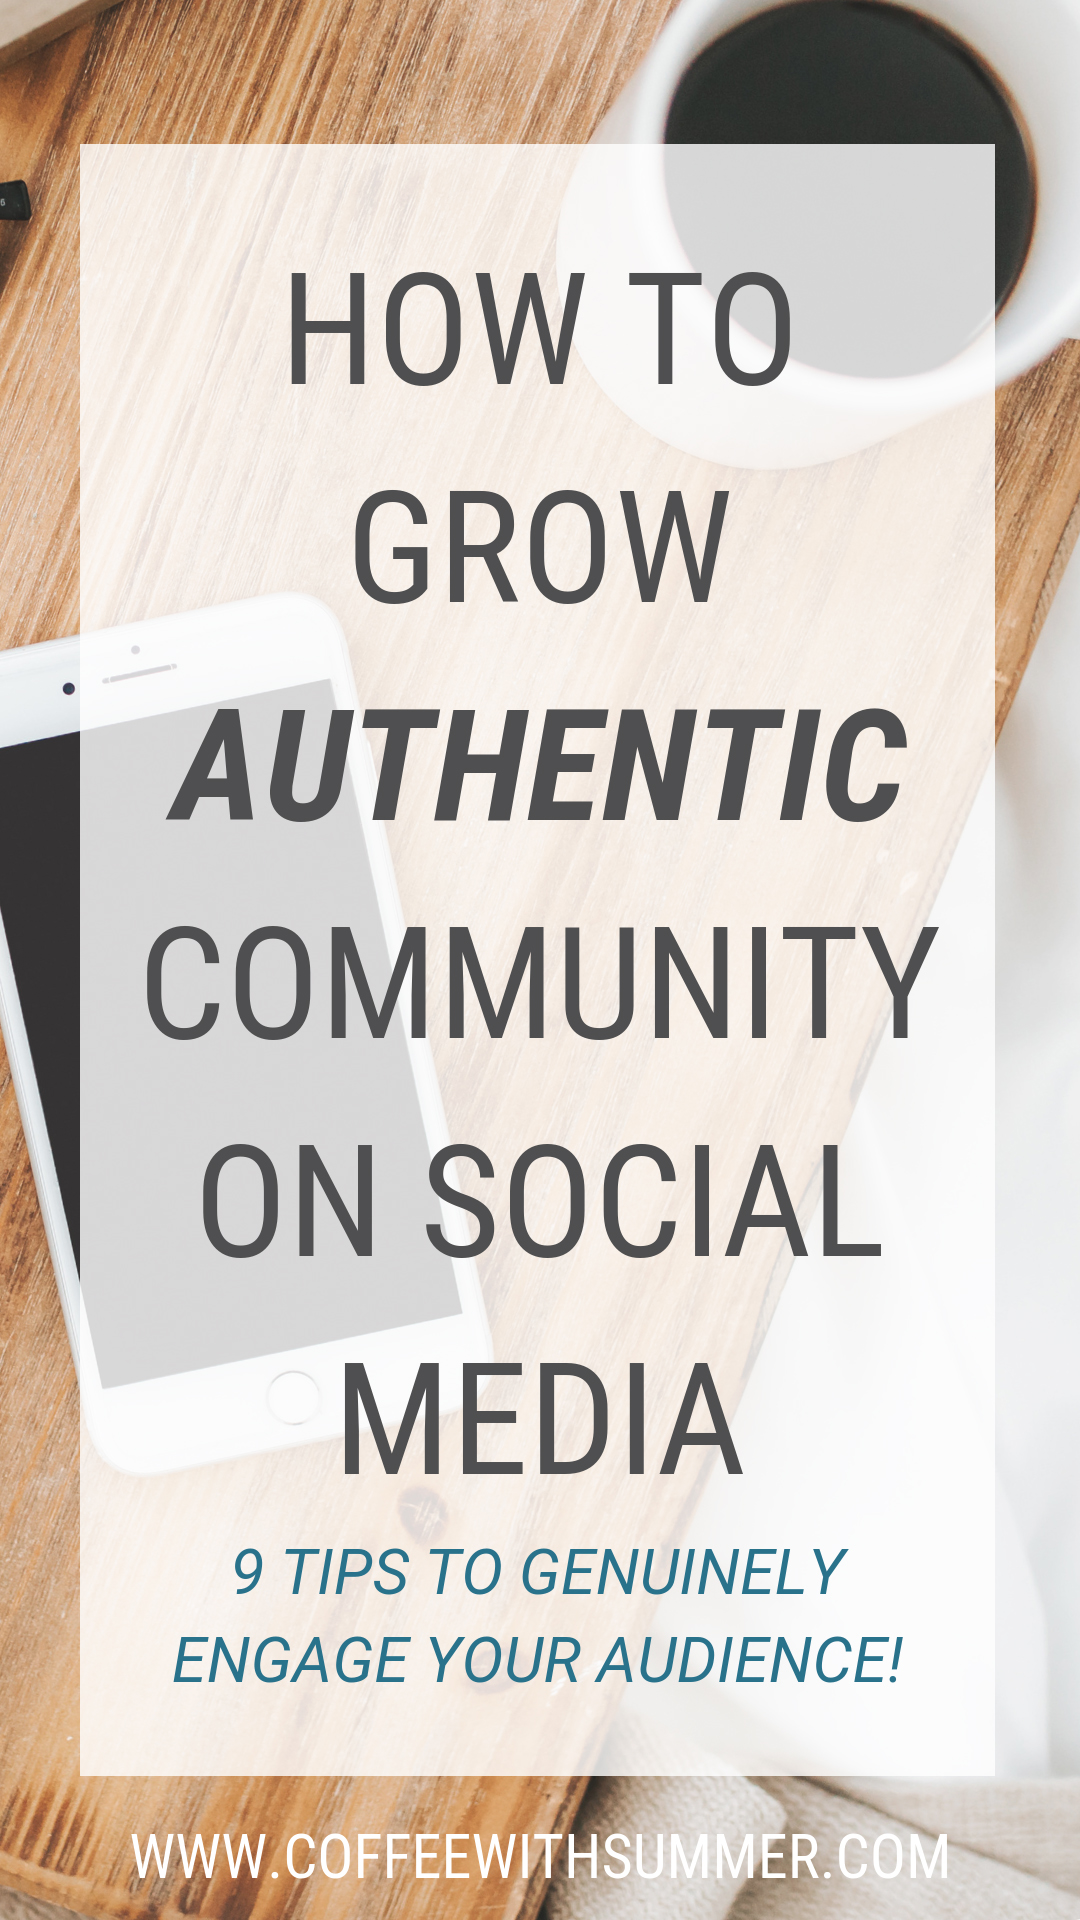 How To Grow Authentic Community On Social Media